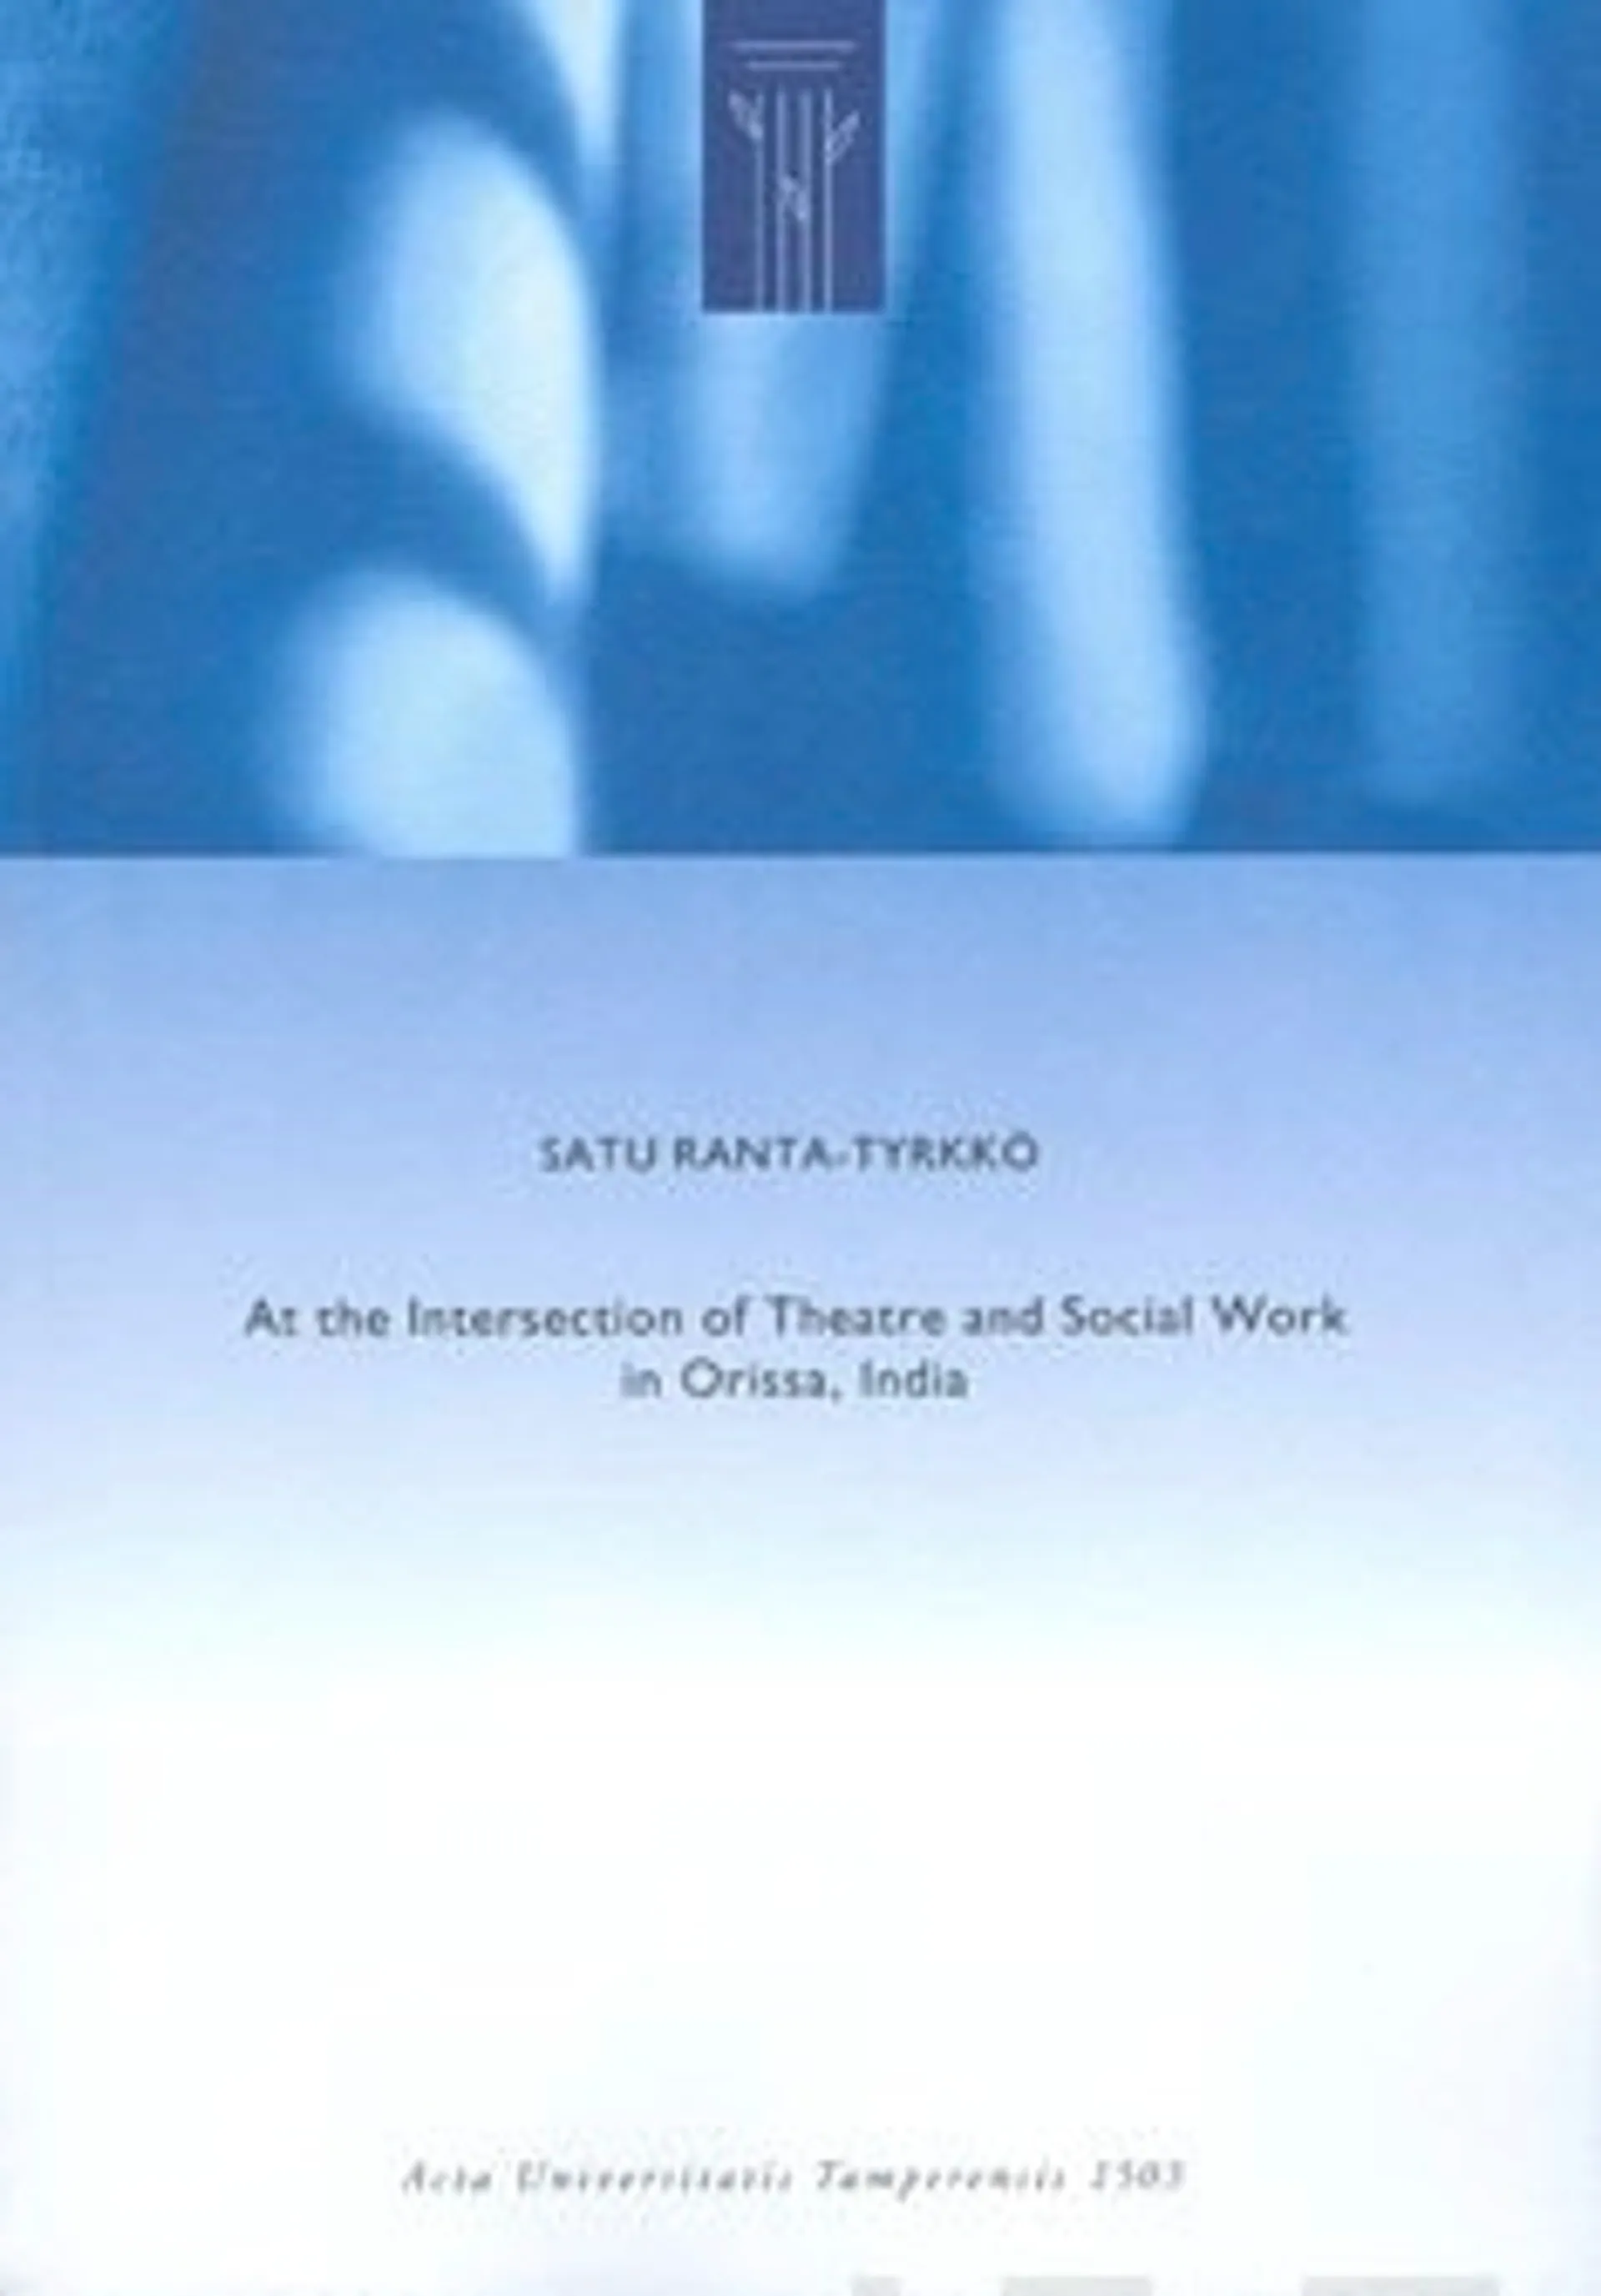 At the Intersection of Theatre and Social Work in Orissa, India